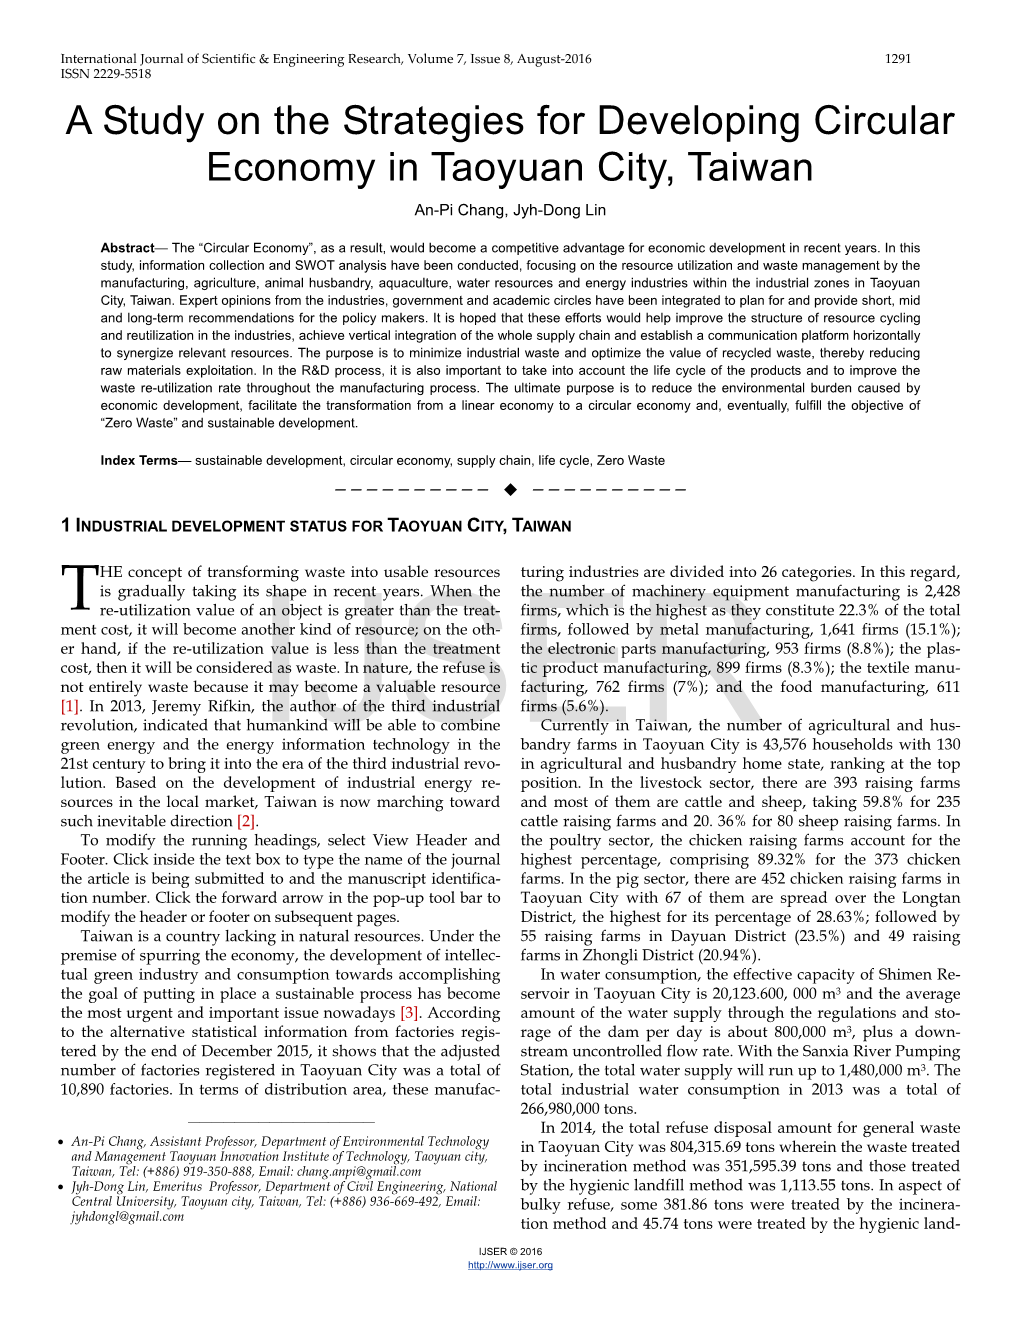 A Study on the Strategies for Developing Circular Economy in Taoyuan City, Taiwan An-Pi Chang, Jyh-Dong Lin